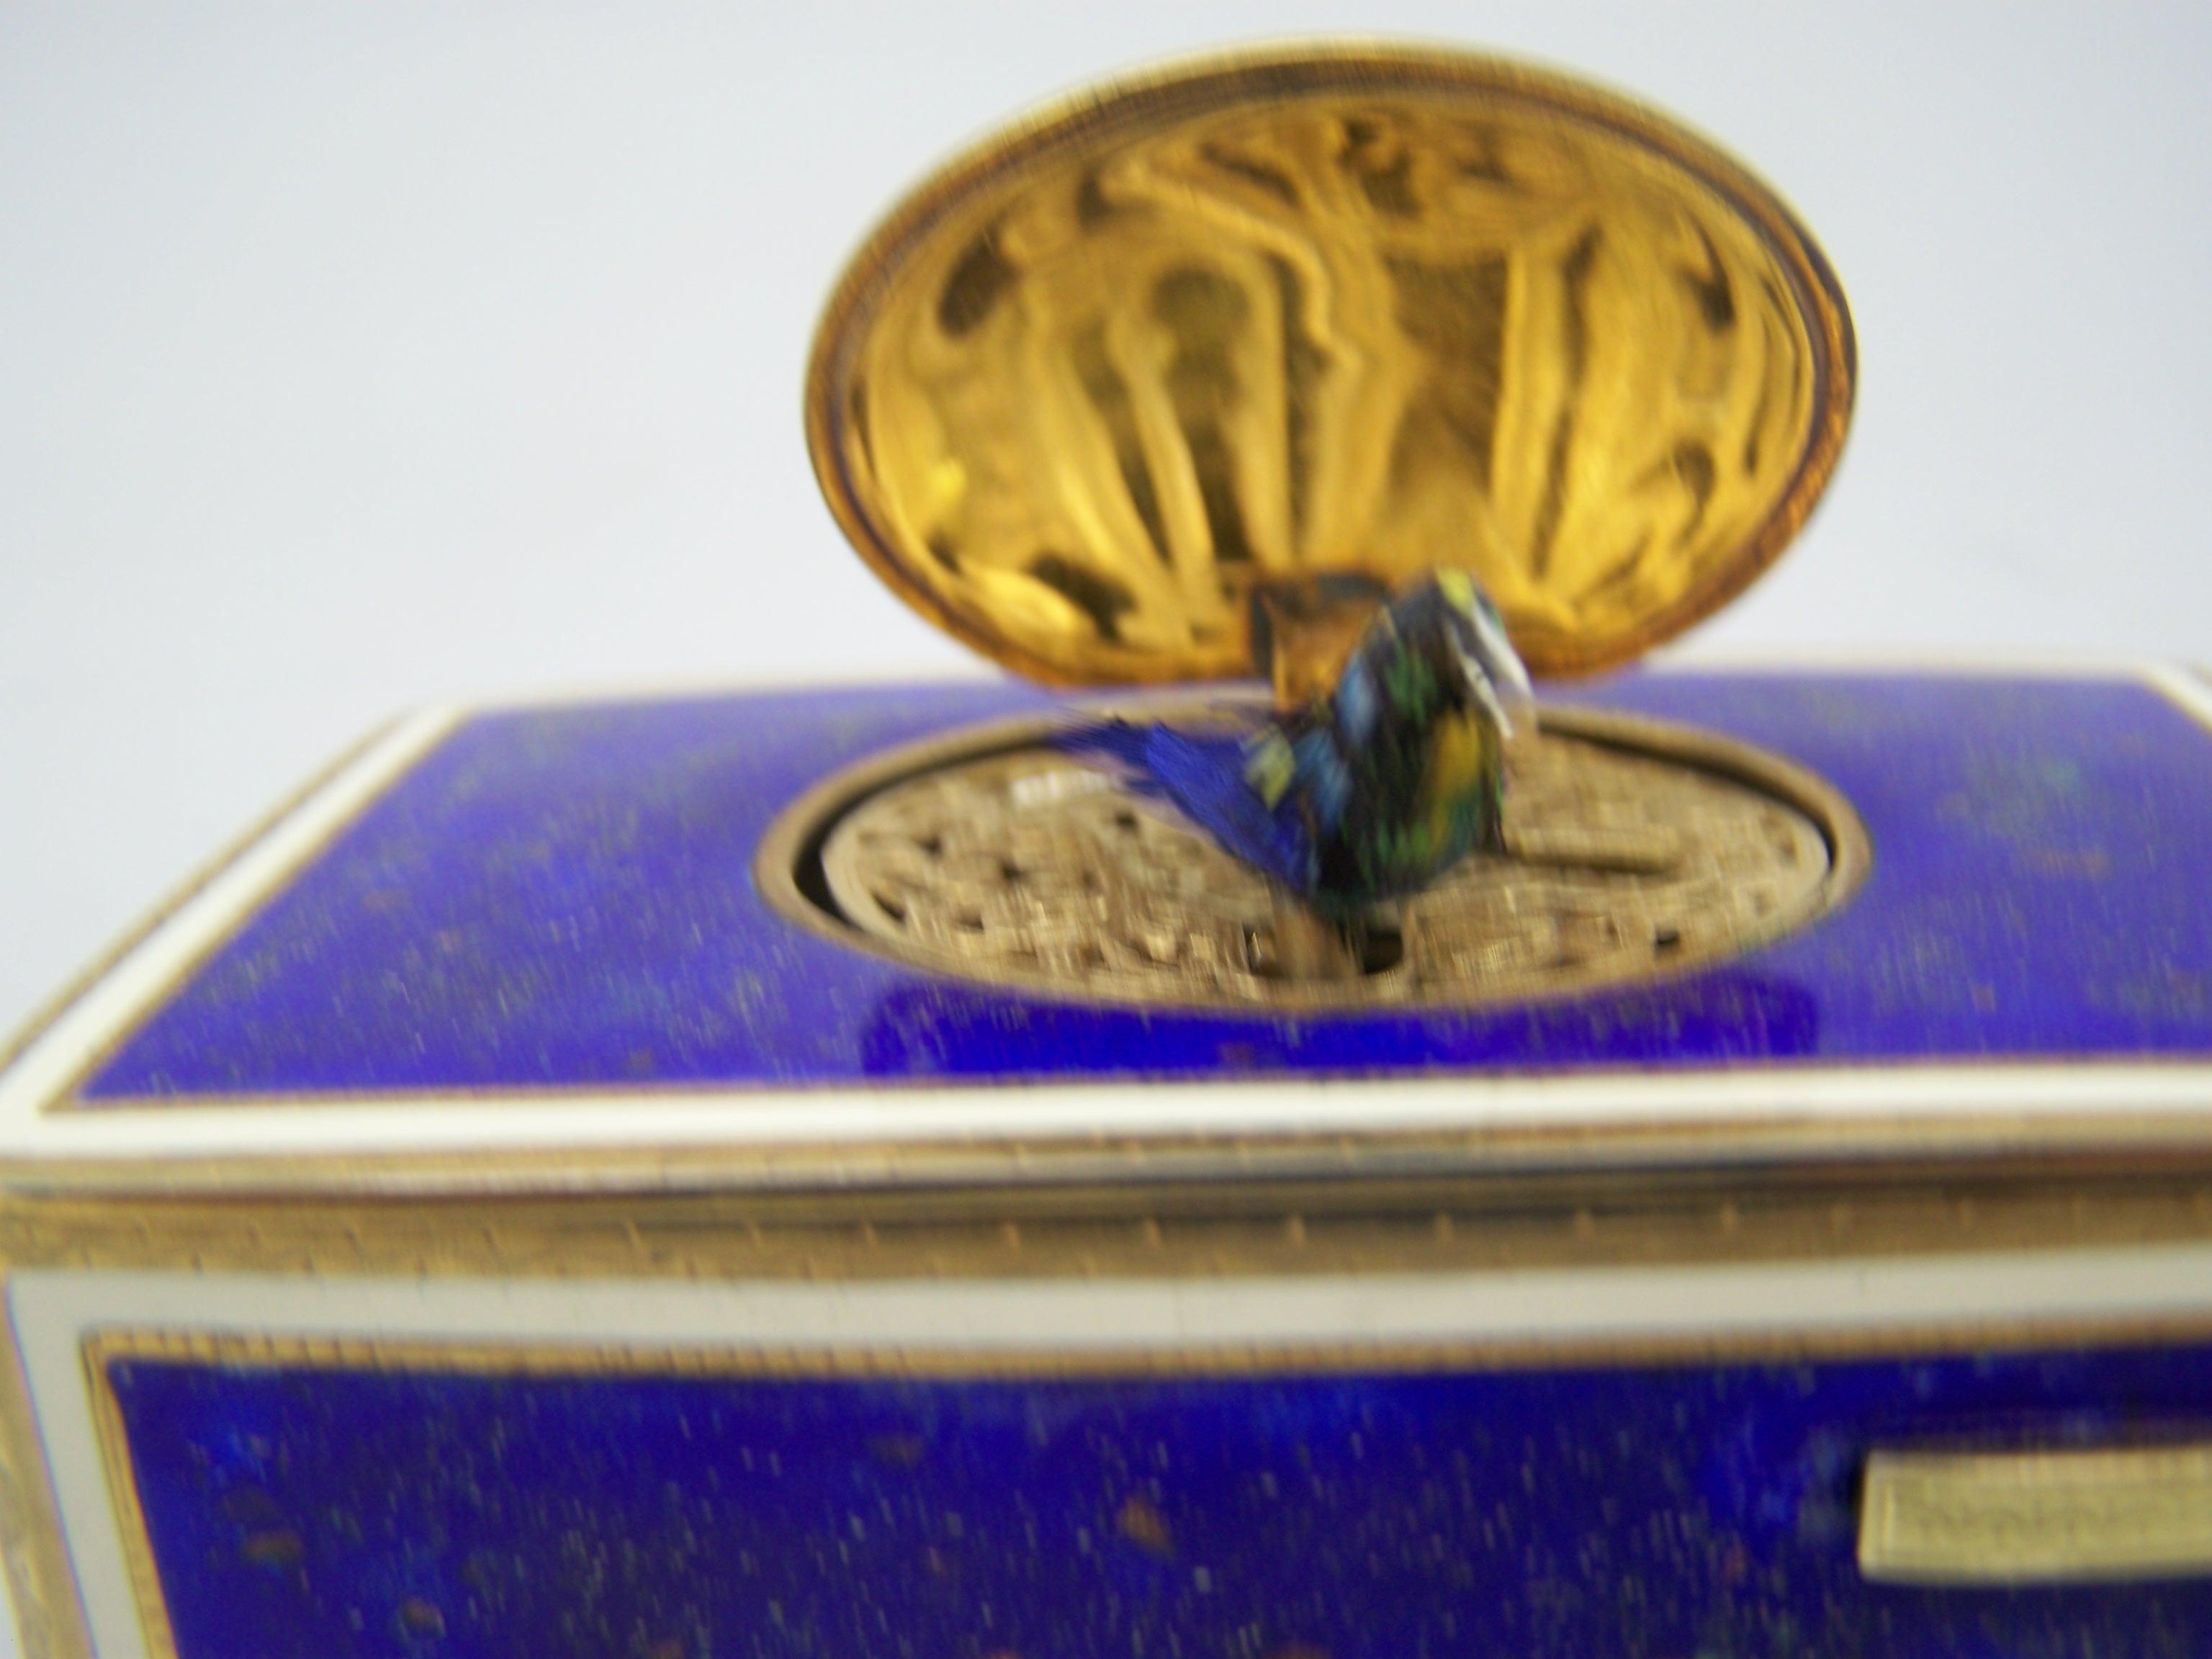 Enamel Singing bird box by K Griesbaum in guilded case and blue-goldflaked enamel